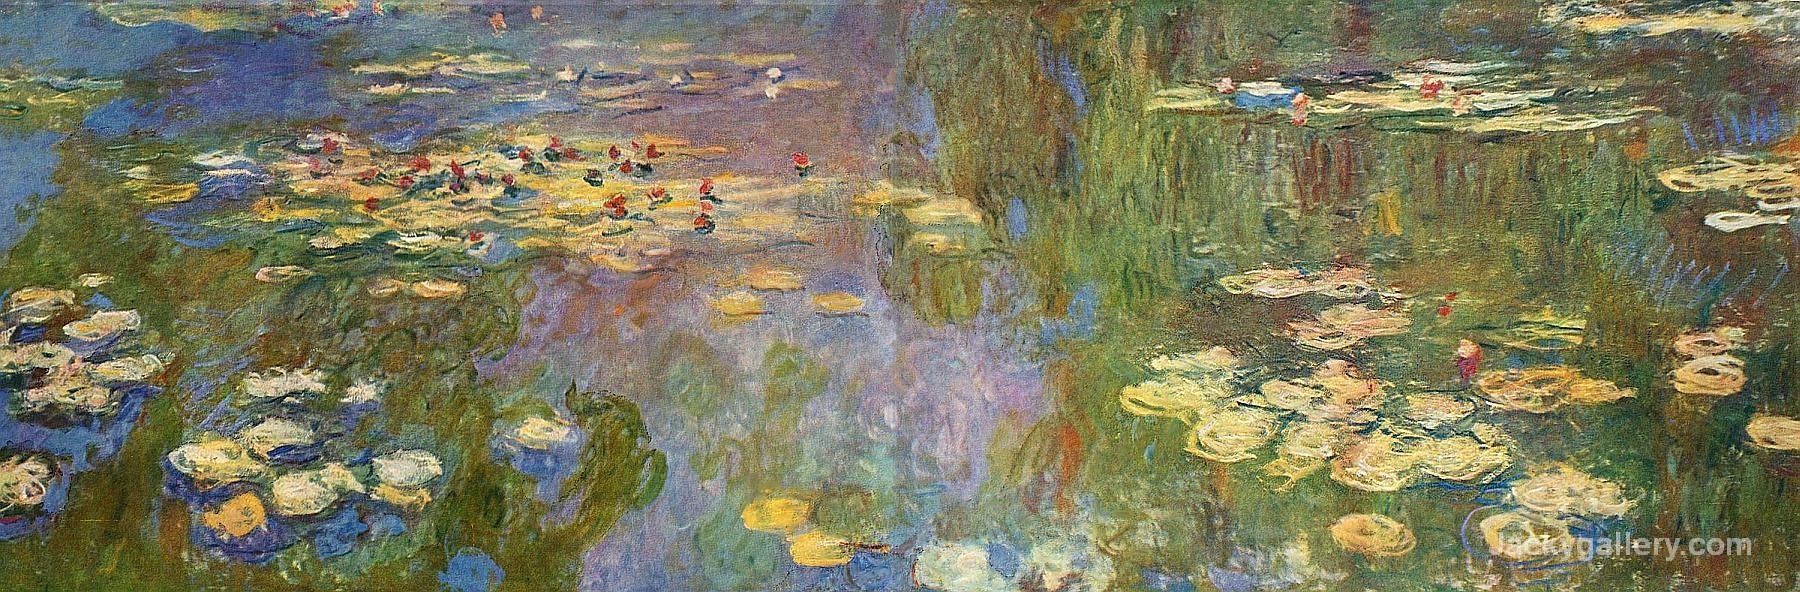 Water Lilies VII by Claude Monet paintings reproduction